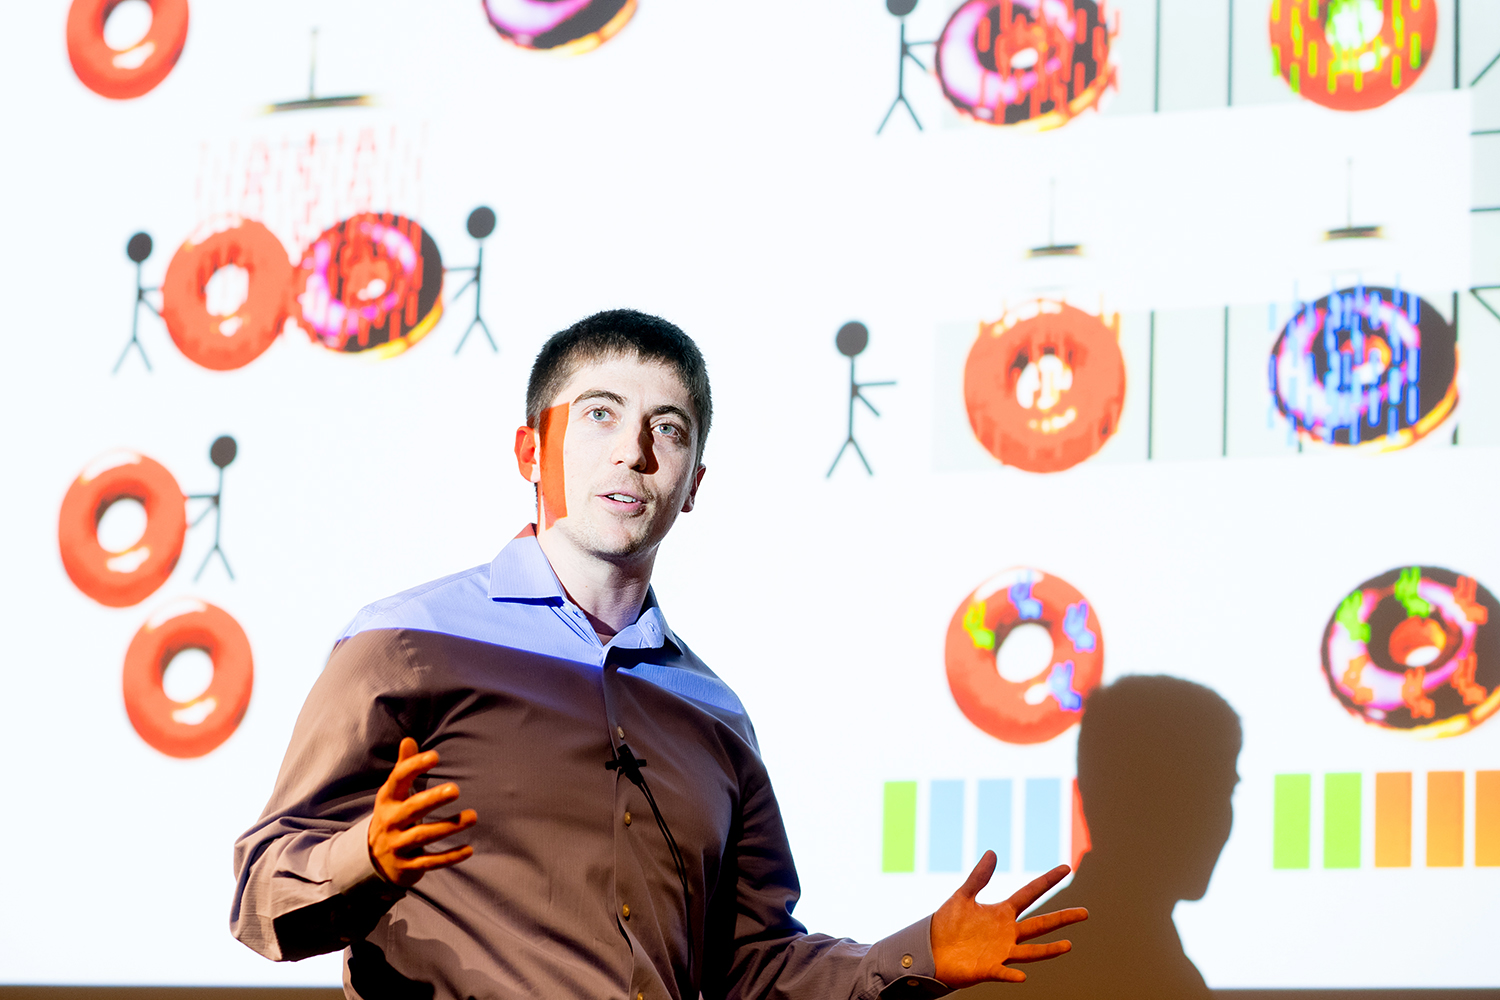 Sam Pollock, who won the people’s choice award, delivers his talk on antibody therapy for tumors that had an extended metaphor on doughnut glazes and the sprinkles that stick to them.